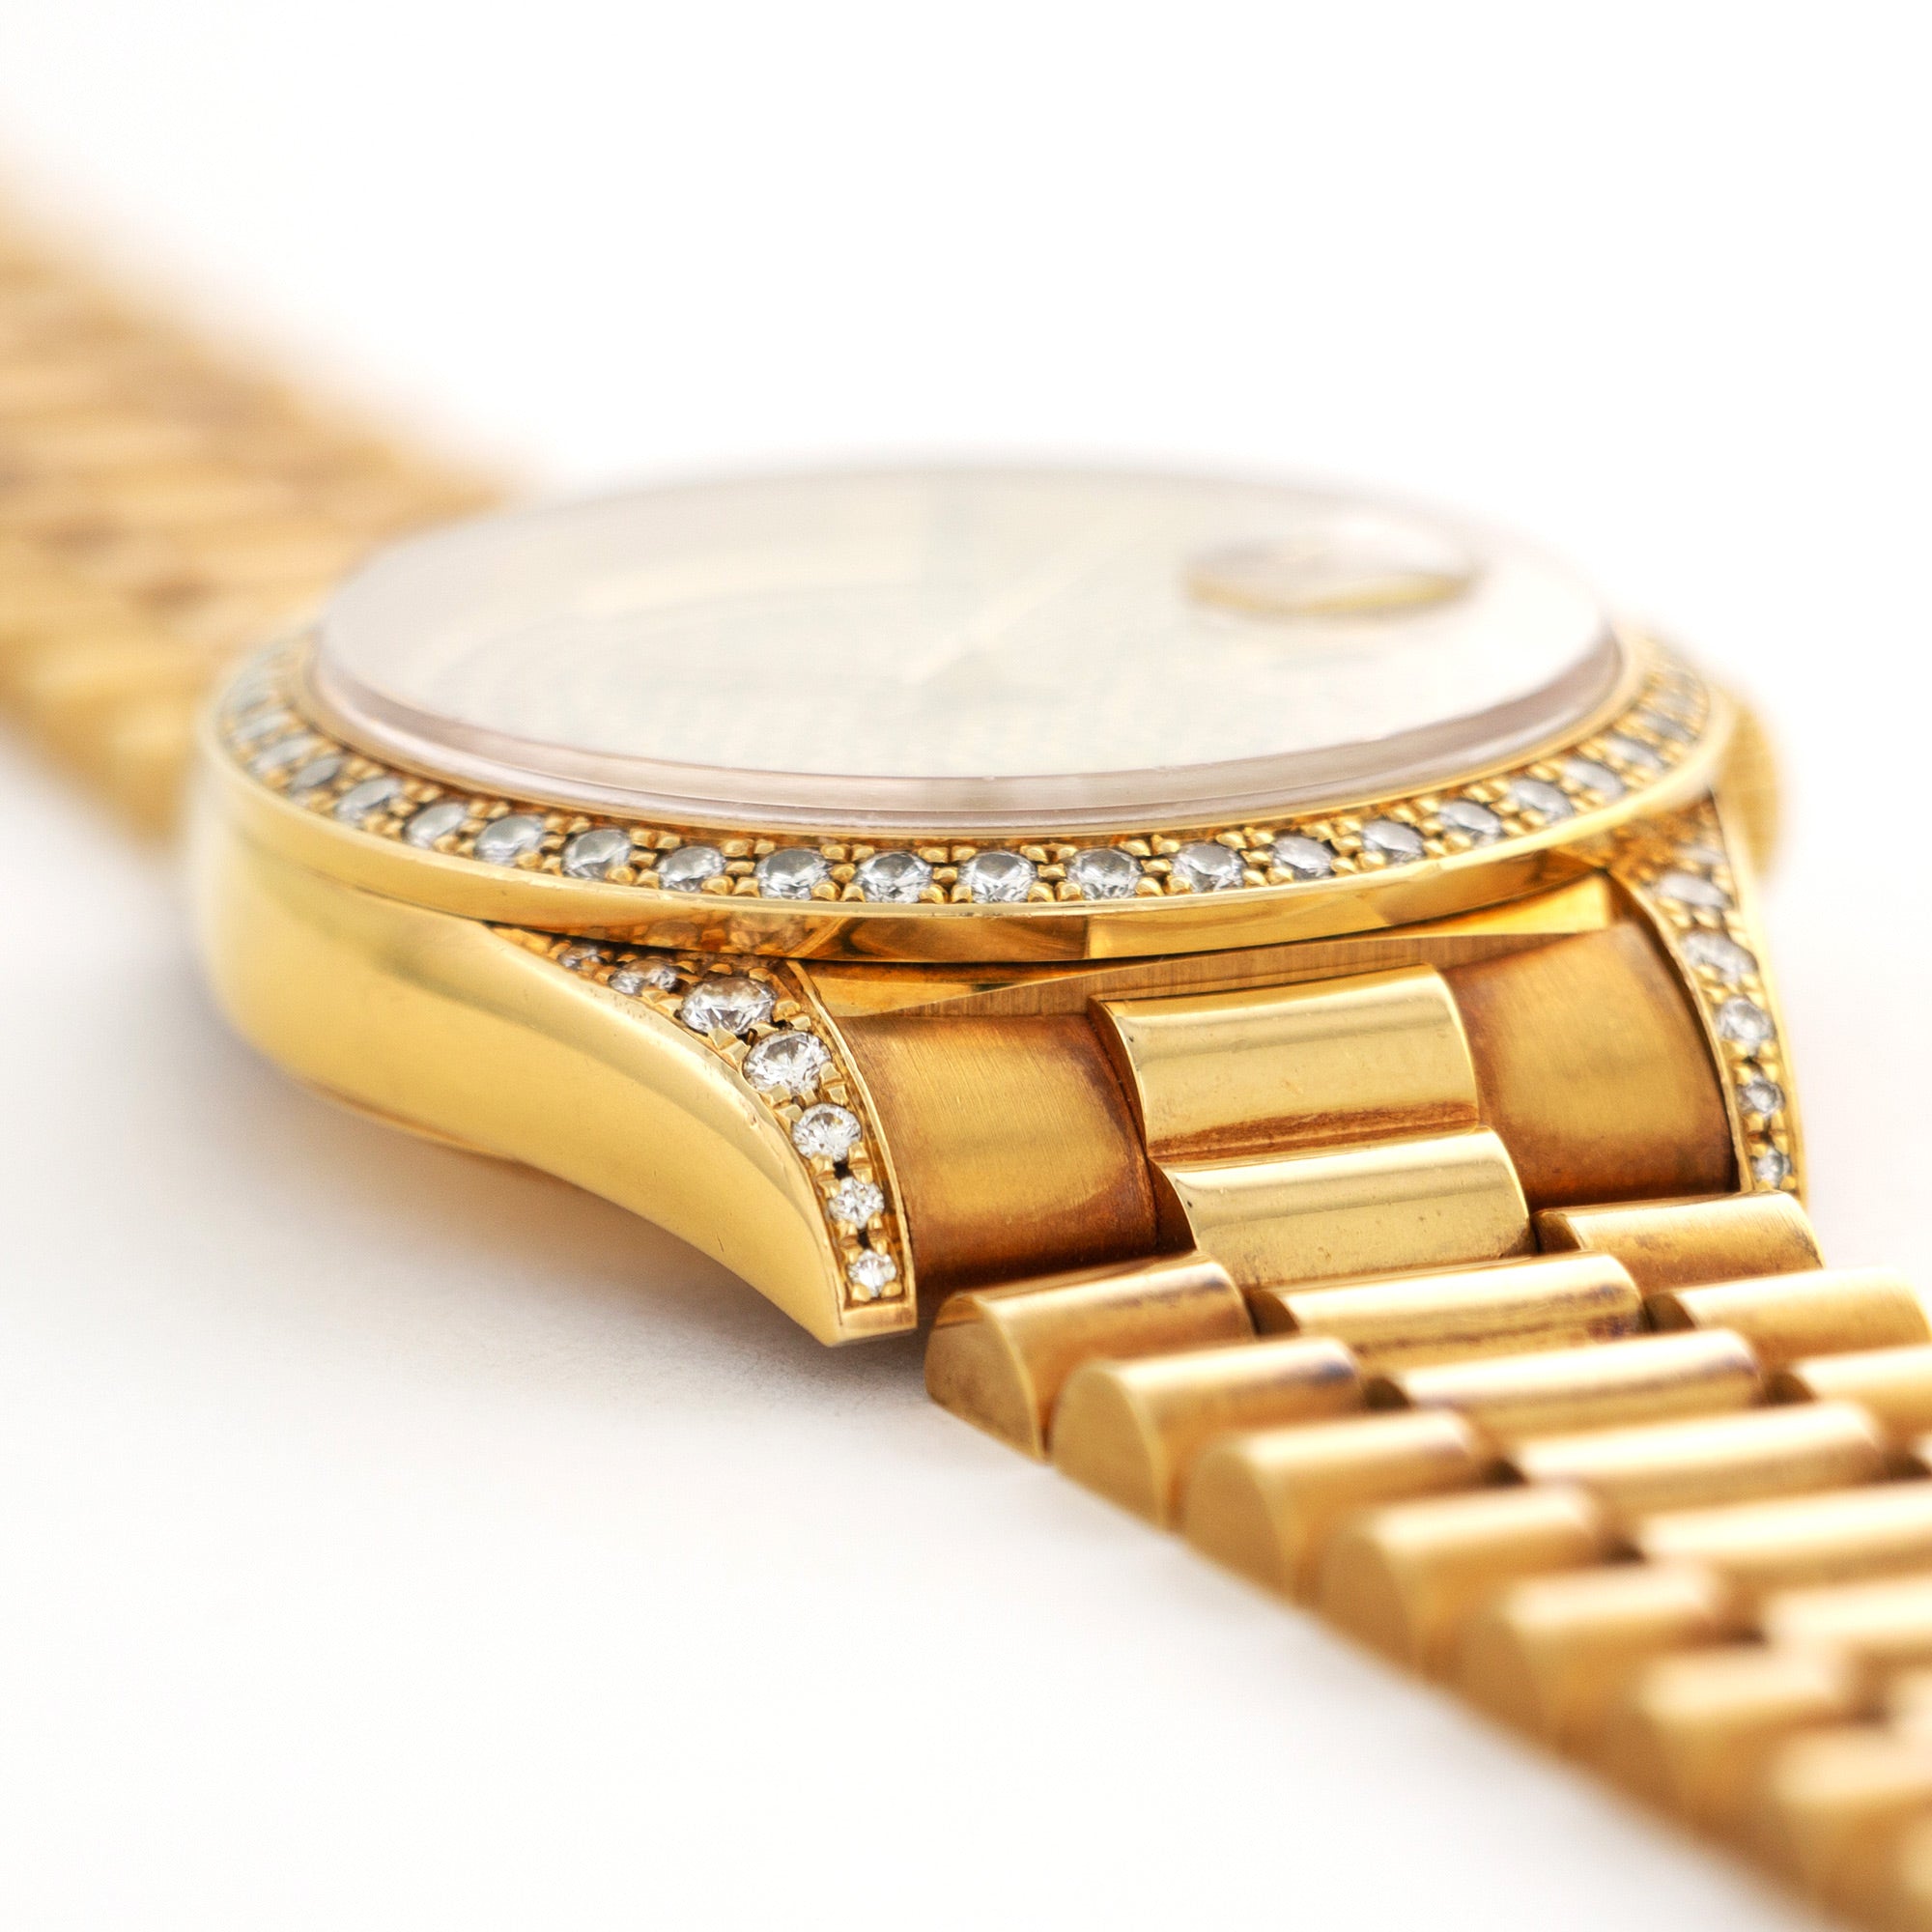 Rolex - Rolex Yellow Gold Day-Date Pave Diamond & Ruby Watch Ref. 18388 - The Keystone Watches